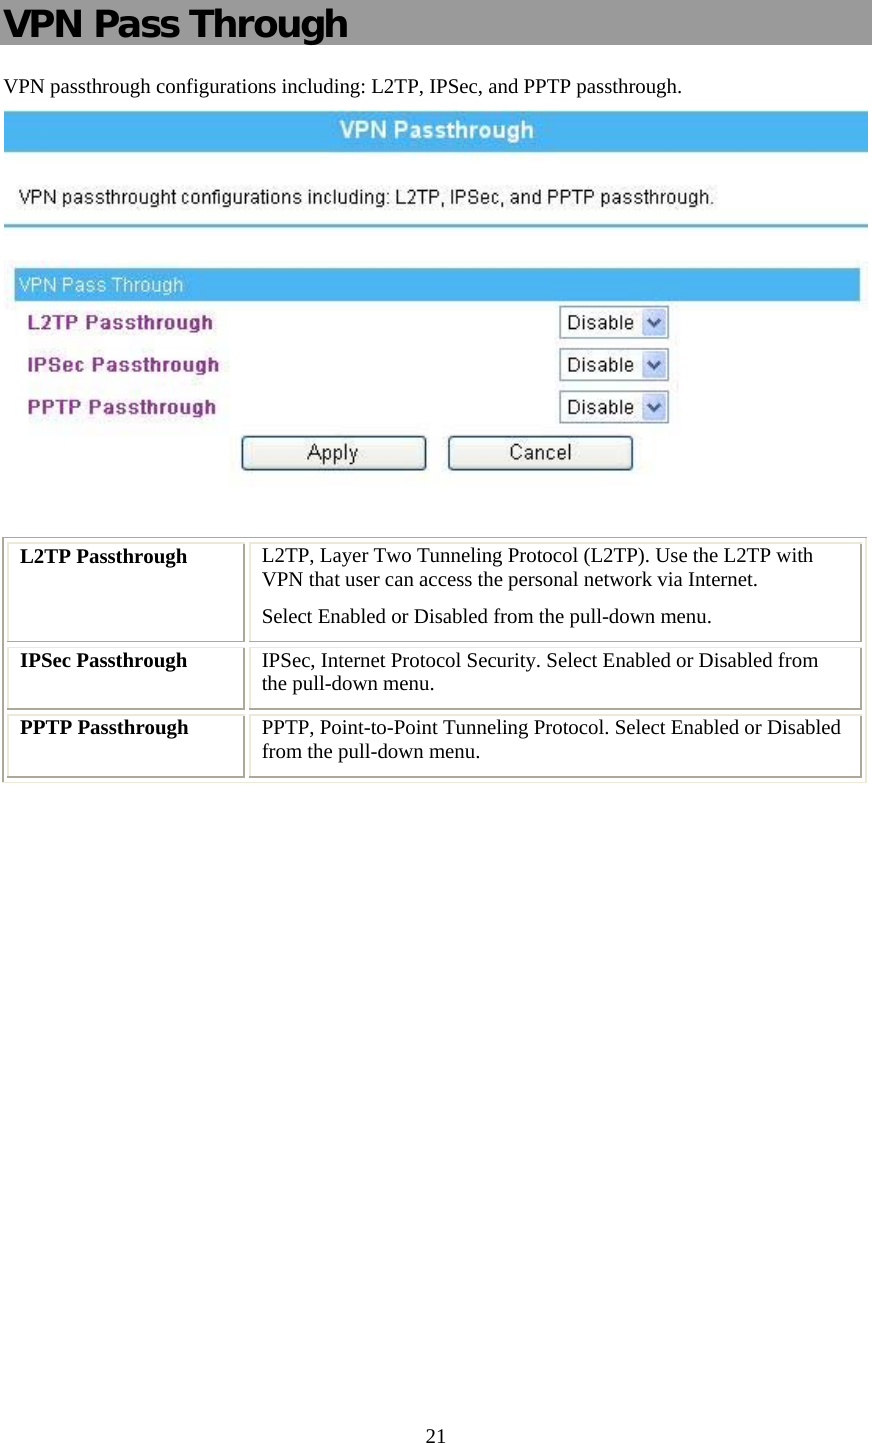   21 VPN Pass Through VPN passthrough configurations including: L2TP, IPSec, and PPTP passthrough.   L2TP Passthrough  L2TP, Layer Two Tunneling Protocol (L2TP). Use the L2TP with VPN that user can access the personal network via Internet. Select Enabled or Disabled from the pull-down menu. IPSec Passthrough  IPSec, Internet Protocol Security. Select Enabled or Disabled from the pull-down menu. PPTP Passthrough  PPTP, Point-to-Point Tunneling Protocol. Select Enabled or Disabled from the pull-down menu. 